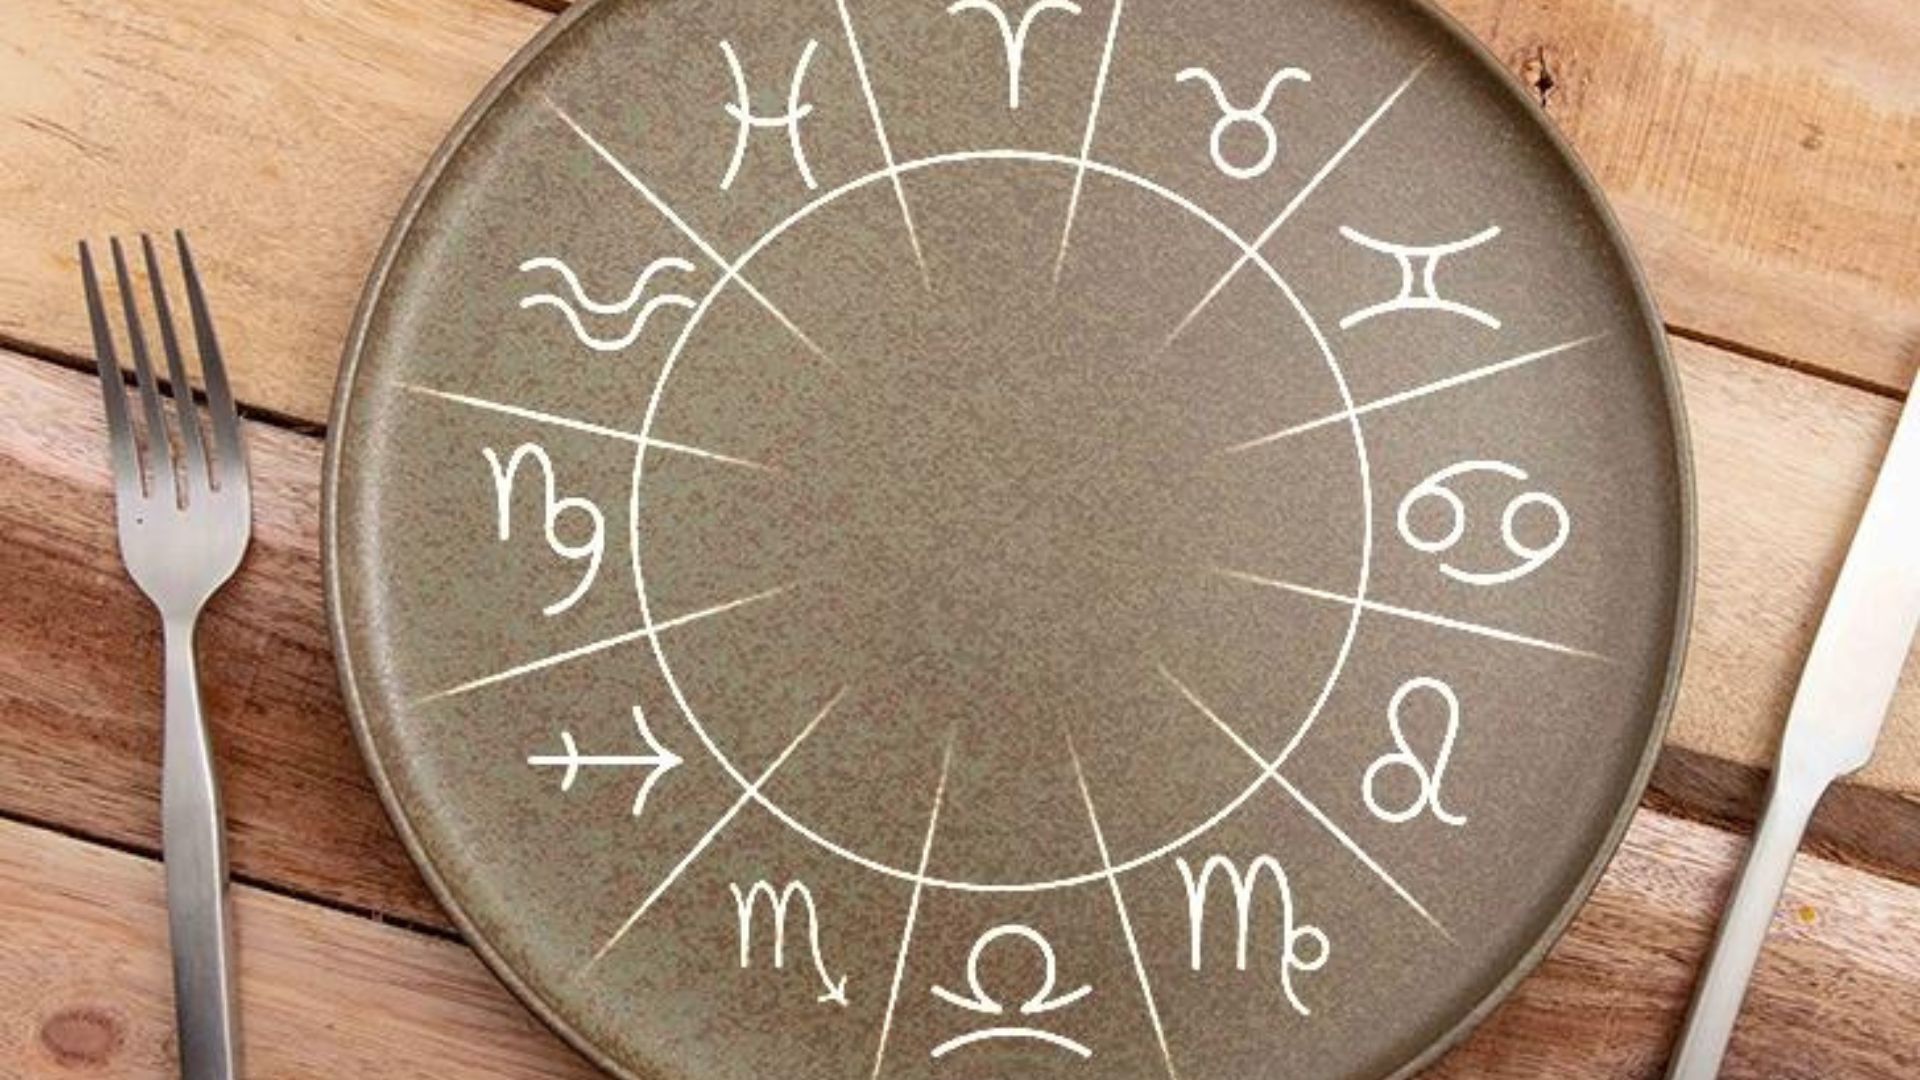 Zodiac Signs On A Plate